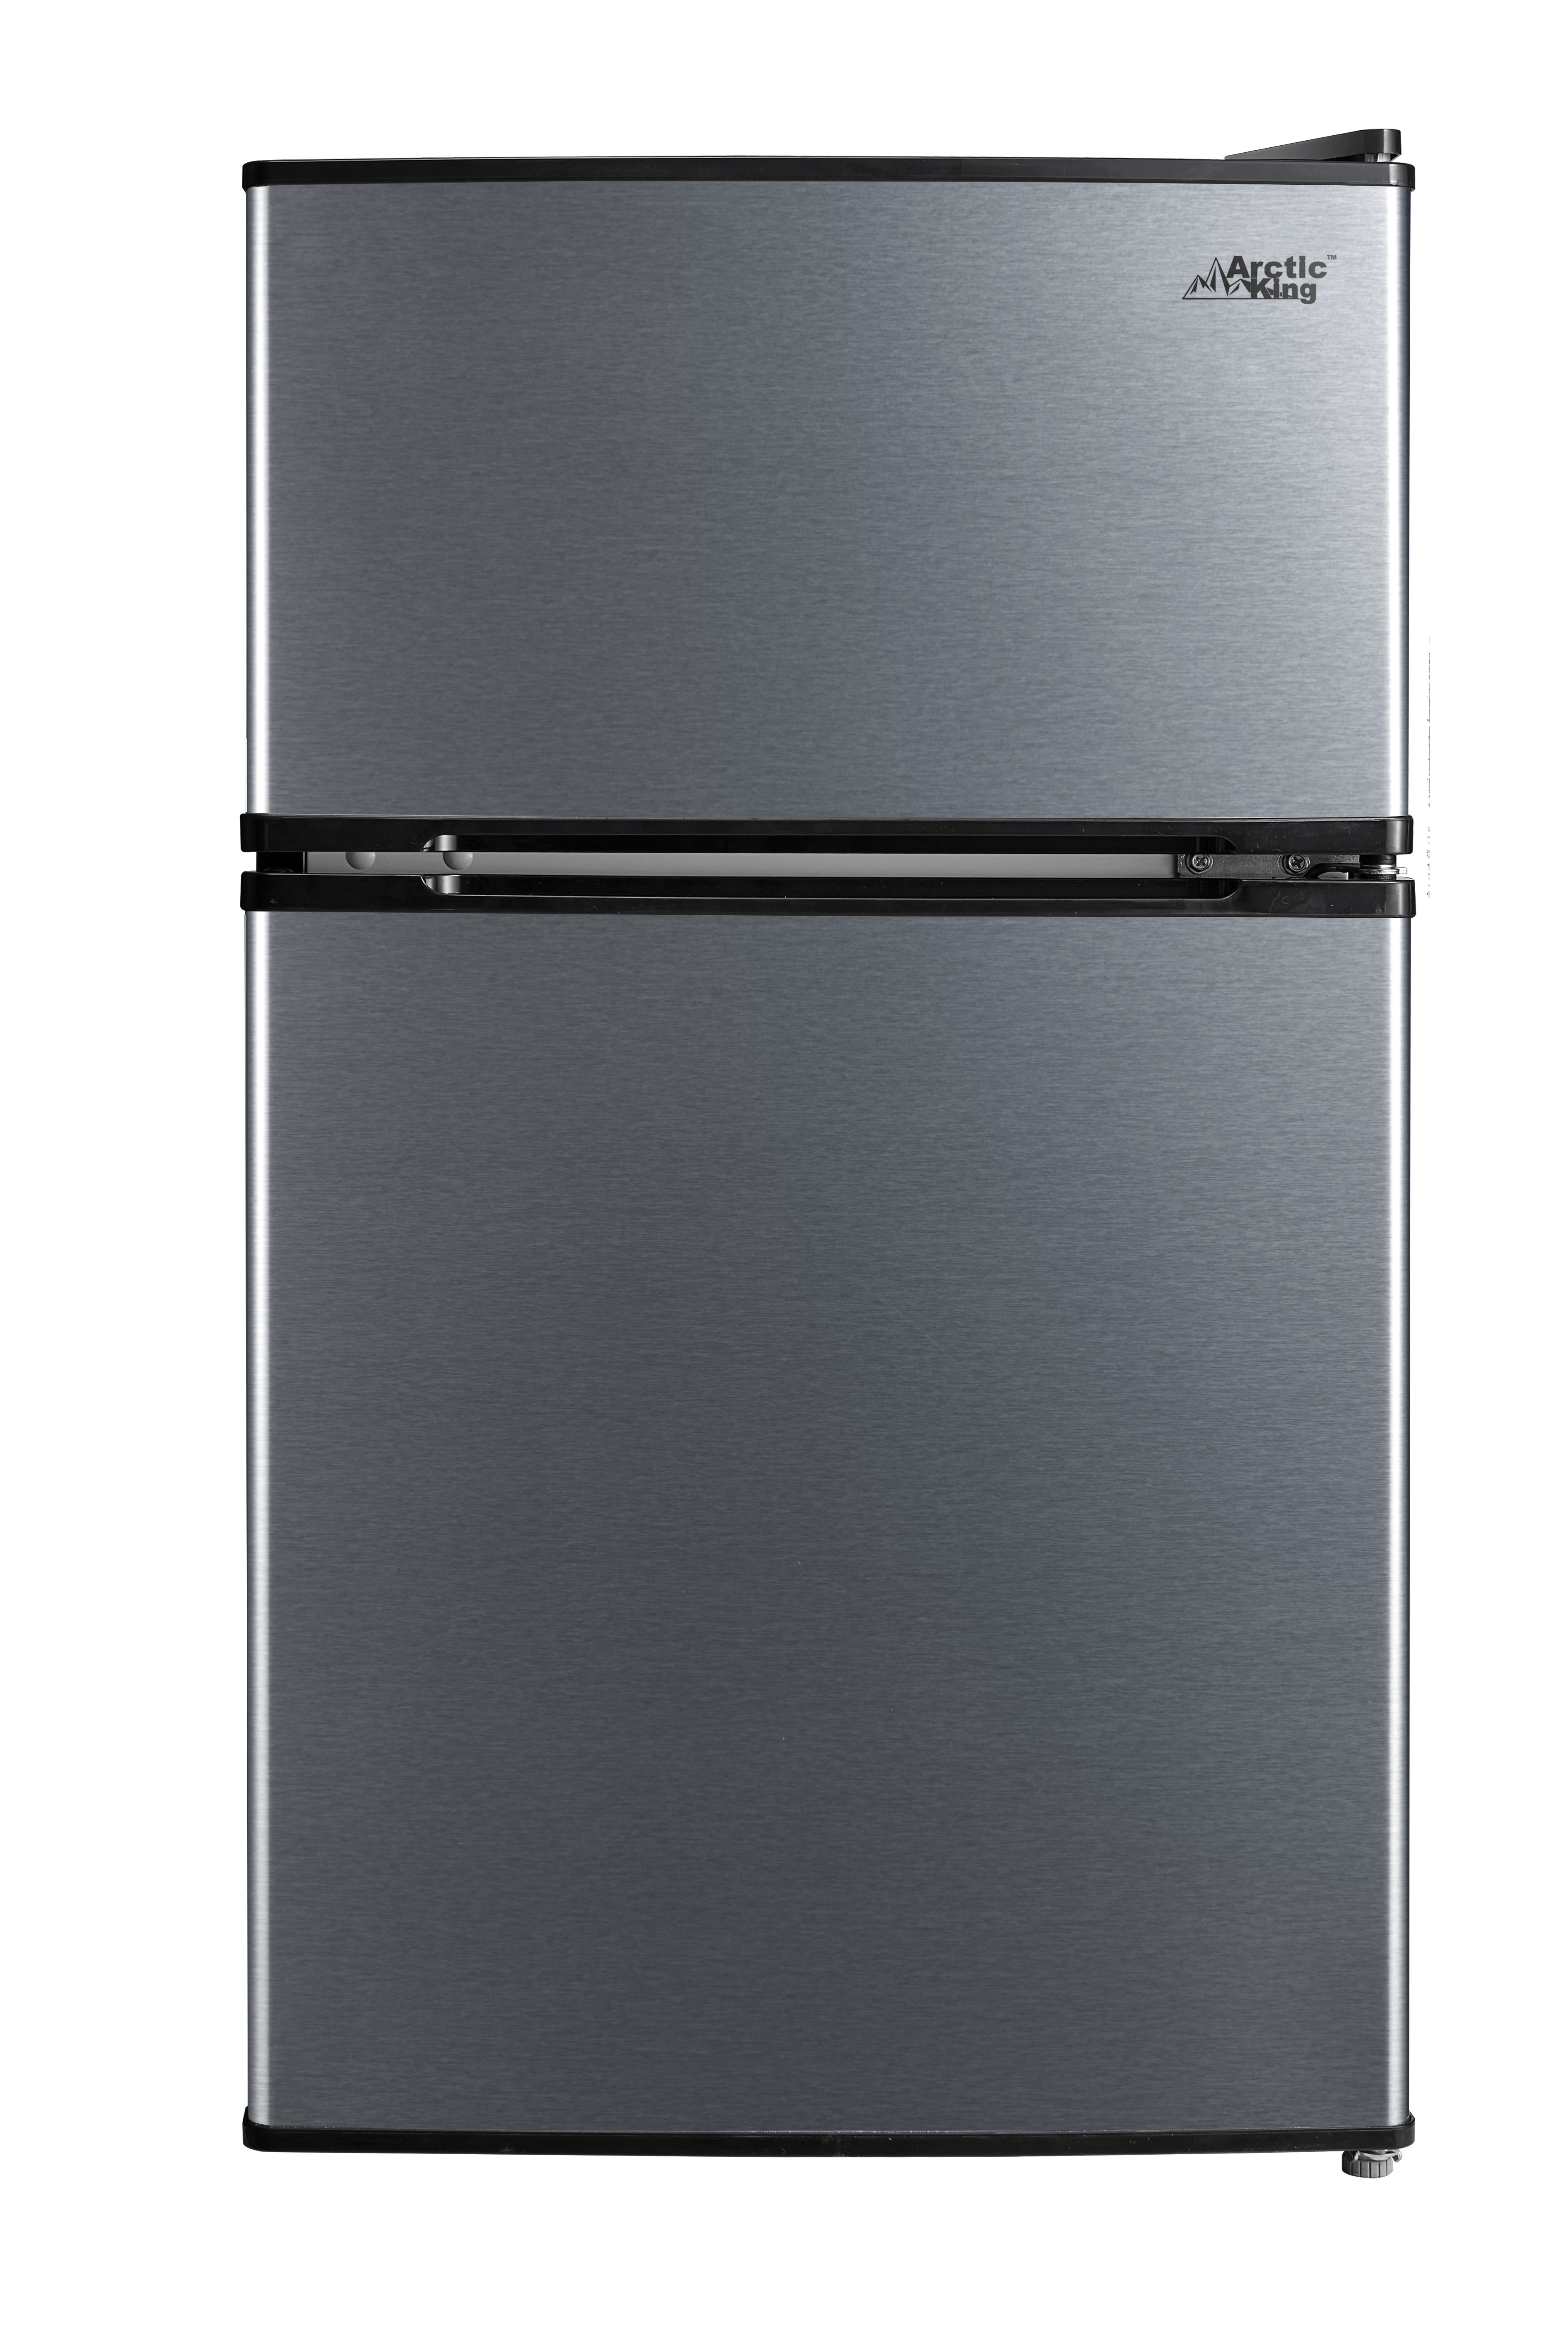 Arctic King 3.2 Cu ft Two Door Compact Refrigerator with Freezer, Black Stainless Steel look - image 1 of 18